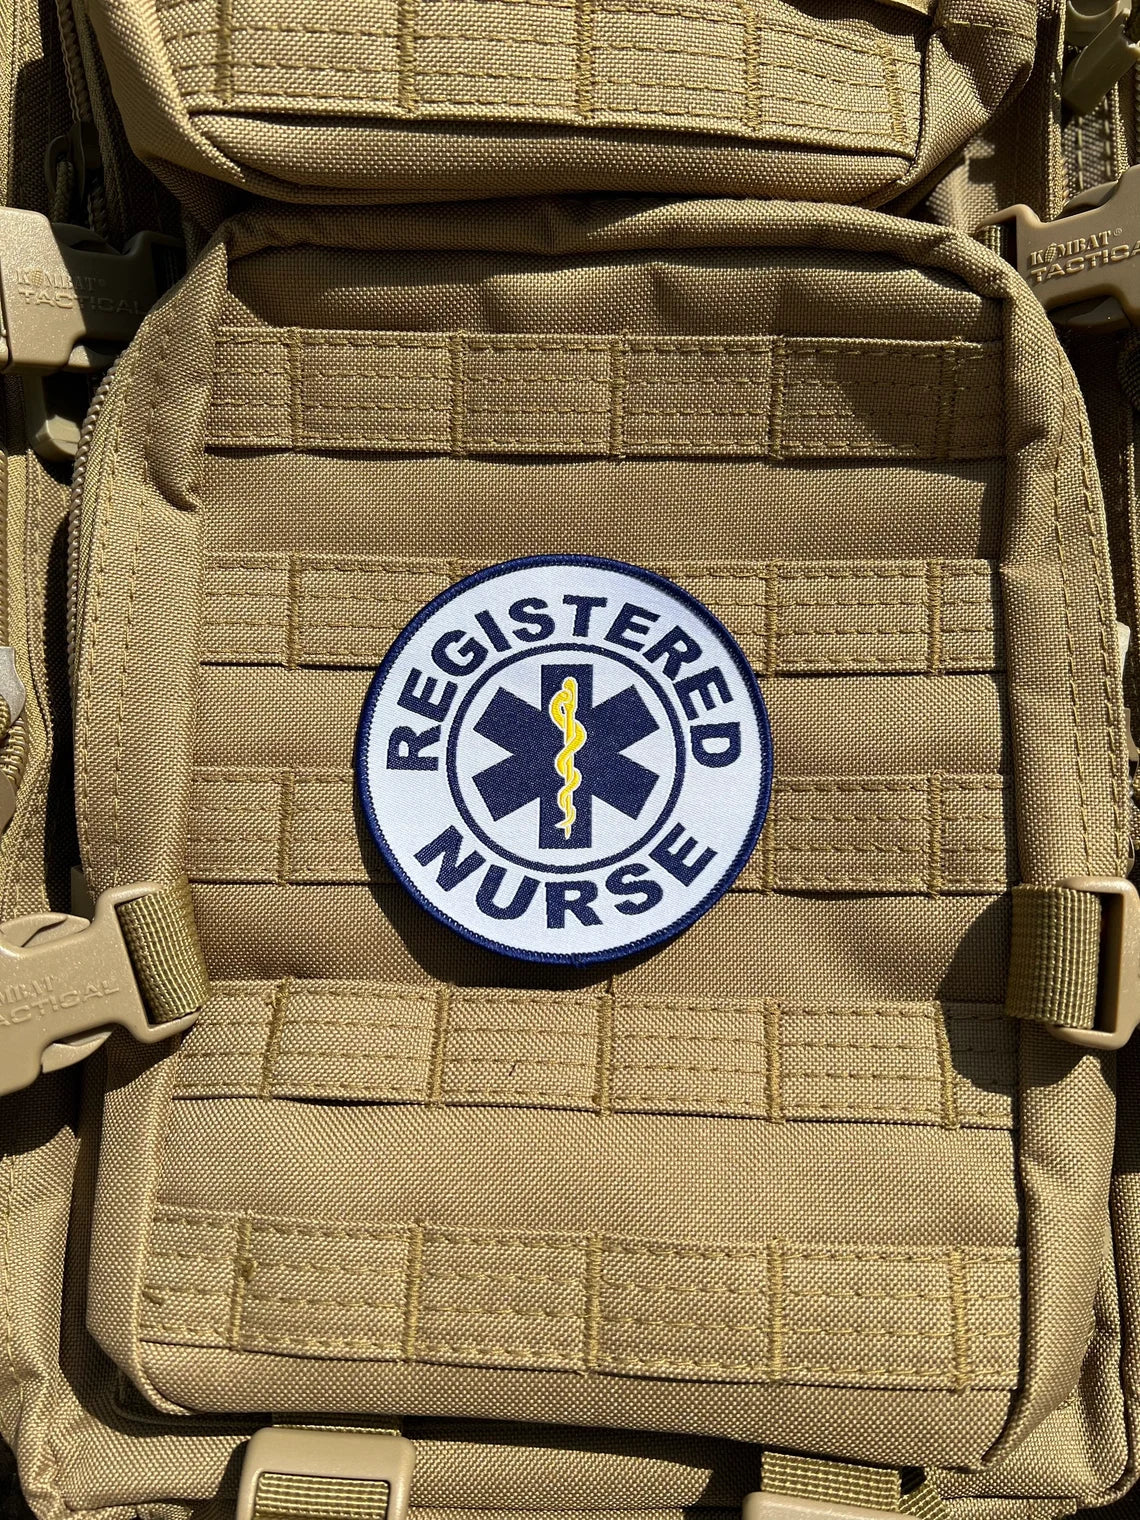 Registered Nurse Patch (3.5 Inch) Iron-on Badge Medic First Aid Patches